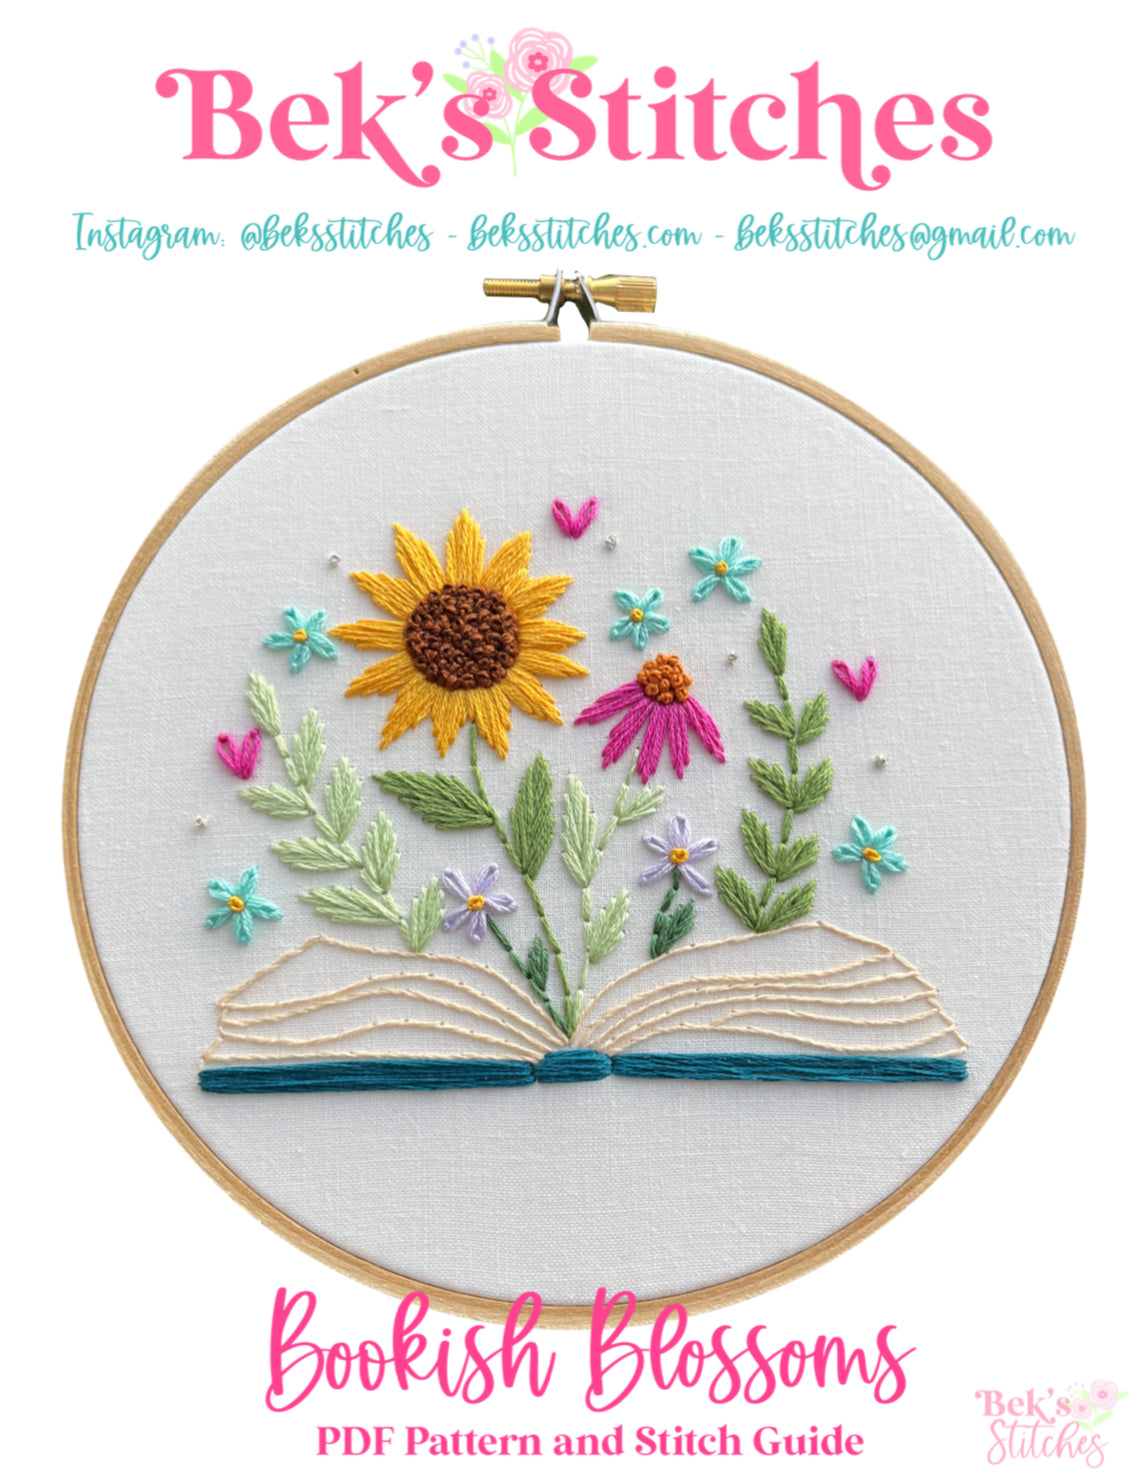 PDF Pattern - Bookish Blossoms, Beginner/Intermediate Floral Open Book Hand Embroidery Pattern